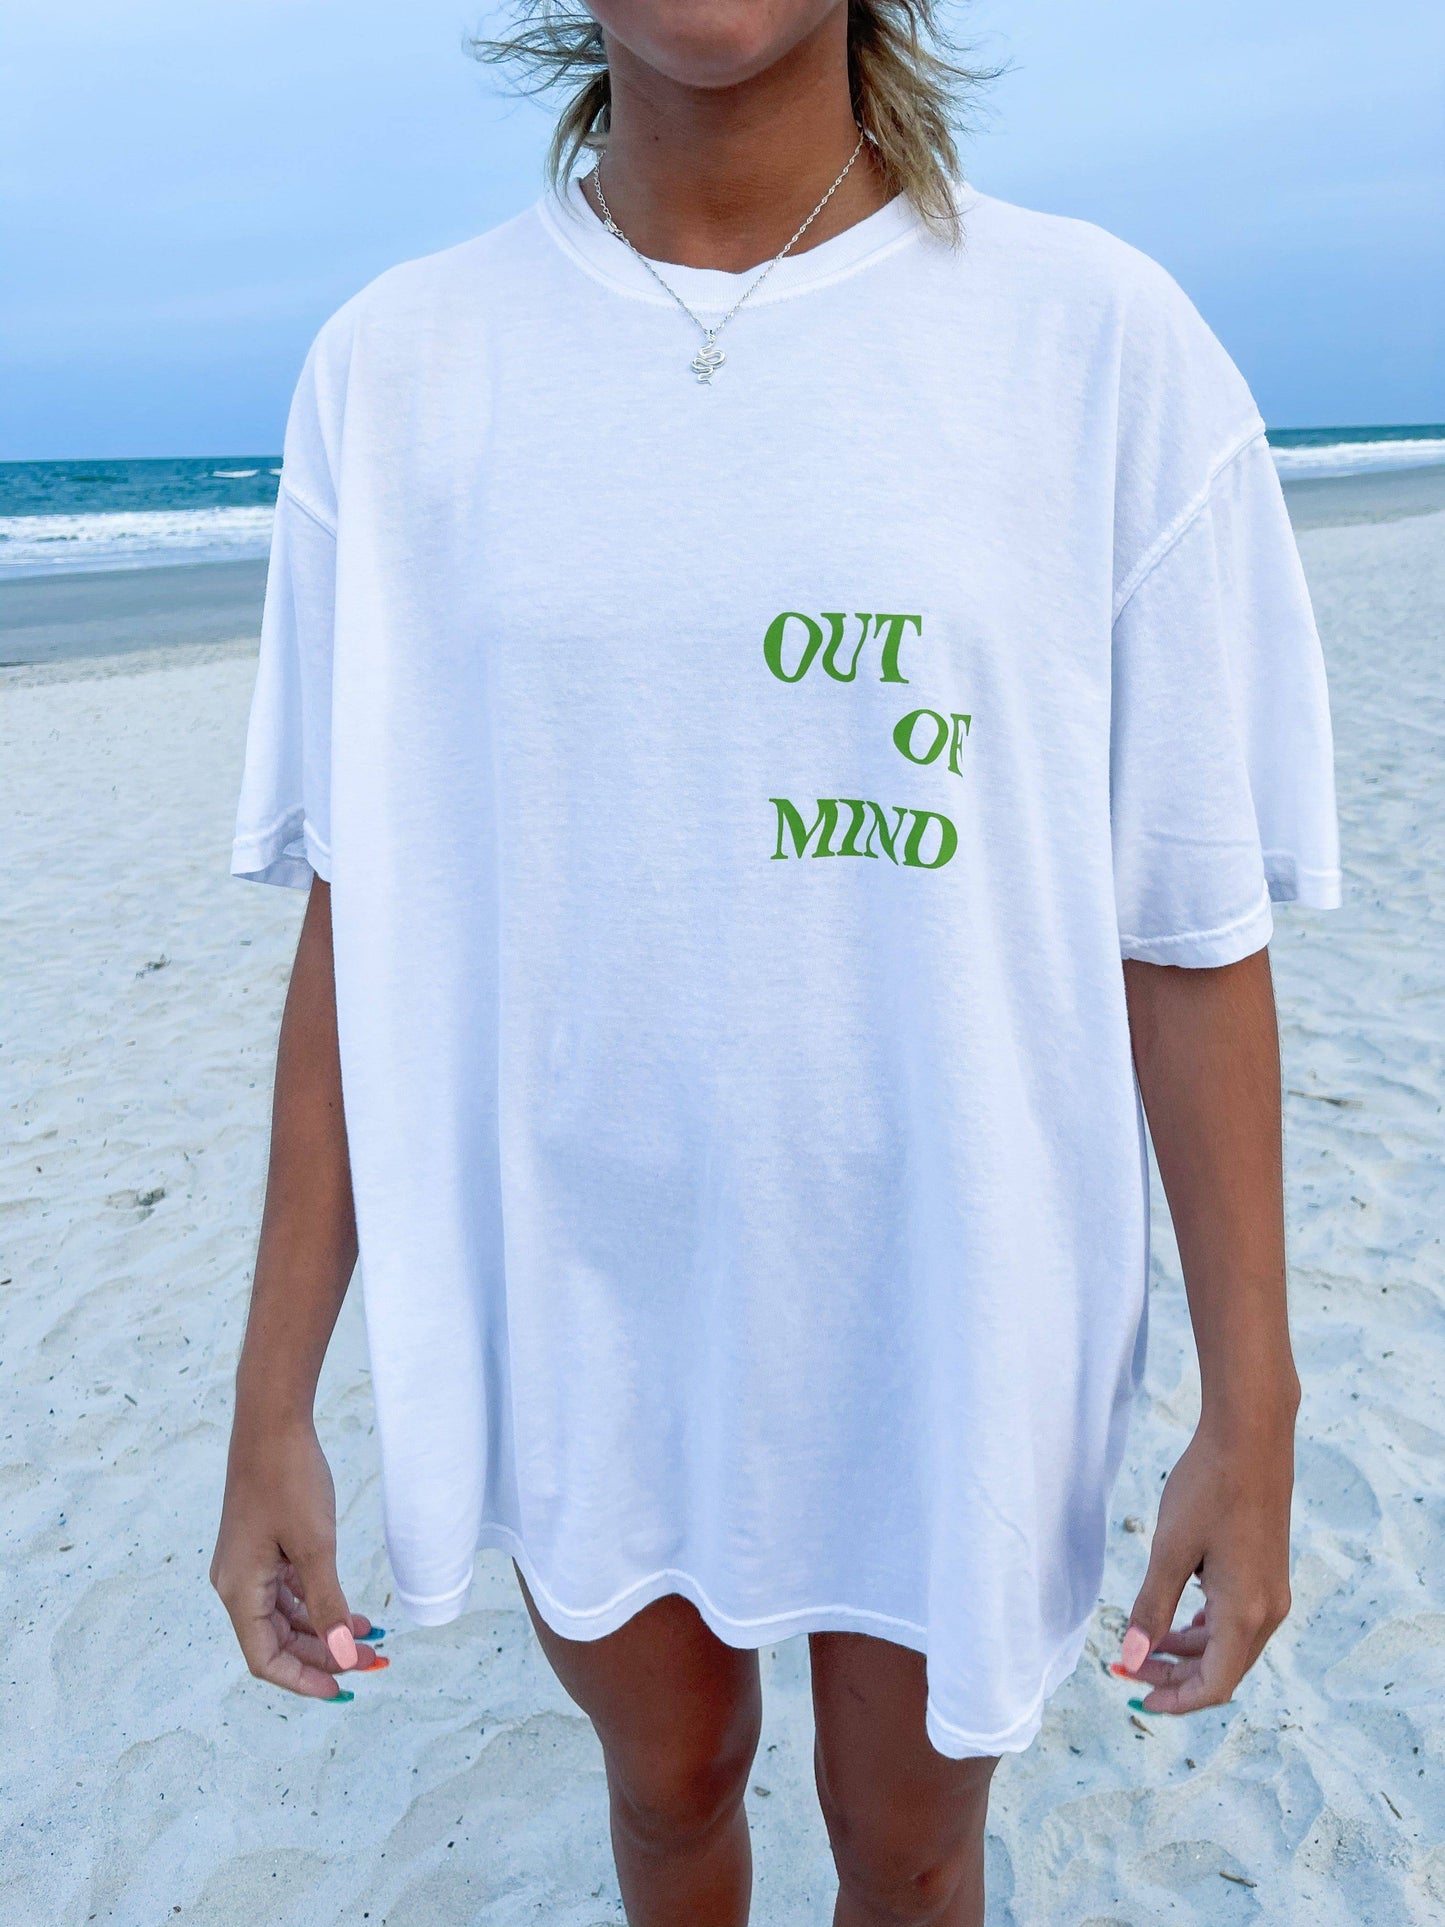 OUT OF MIND SHIRT - JEWELS KENNEDY DESIGNS